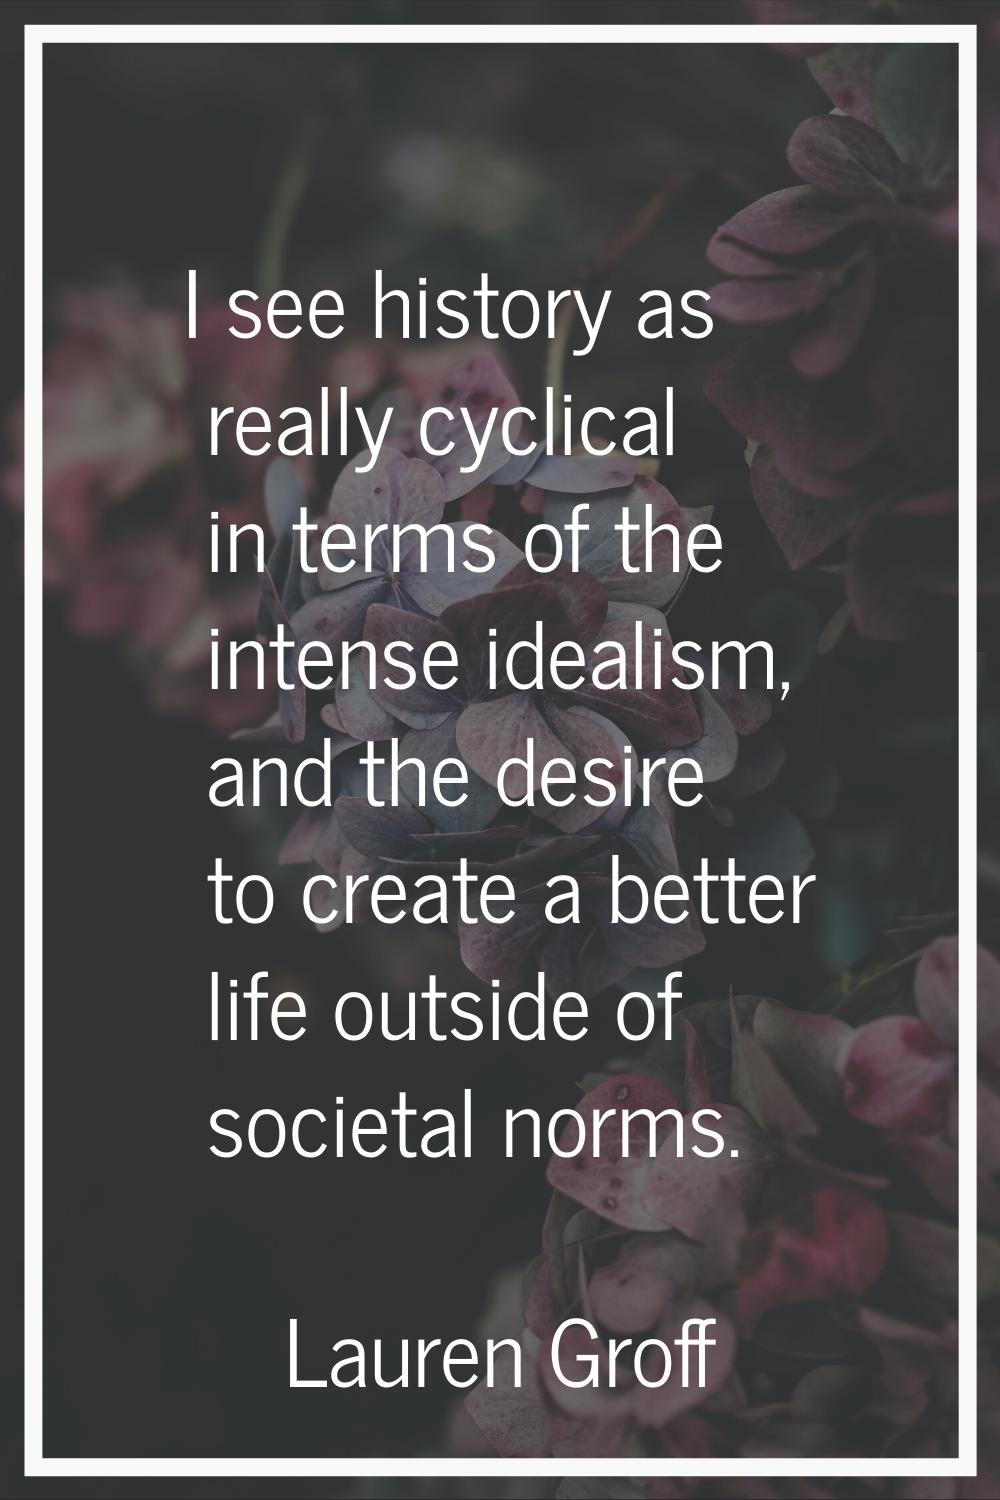 I see history as really cyclical in terms of the intense idealism, and the desire to create a bette